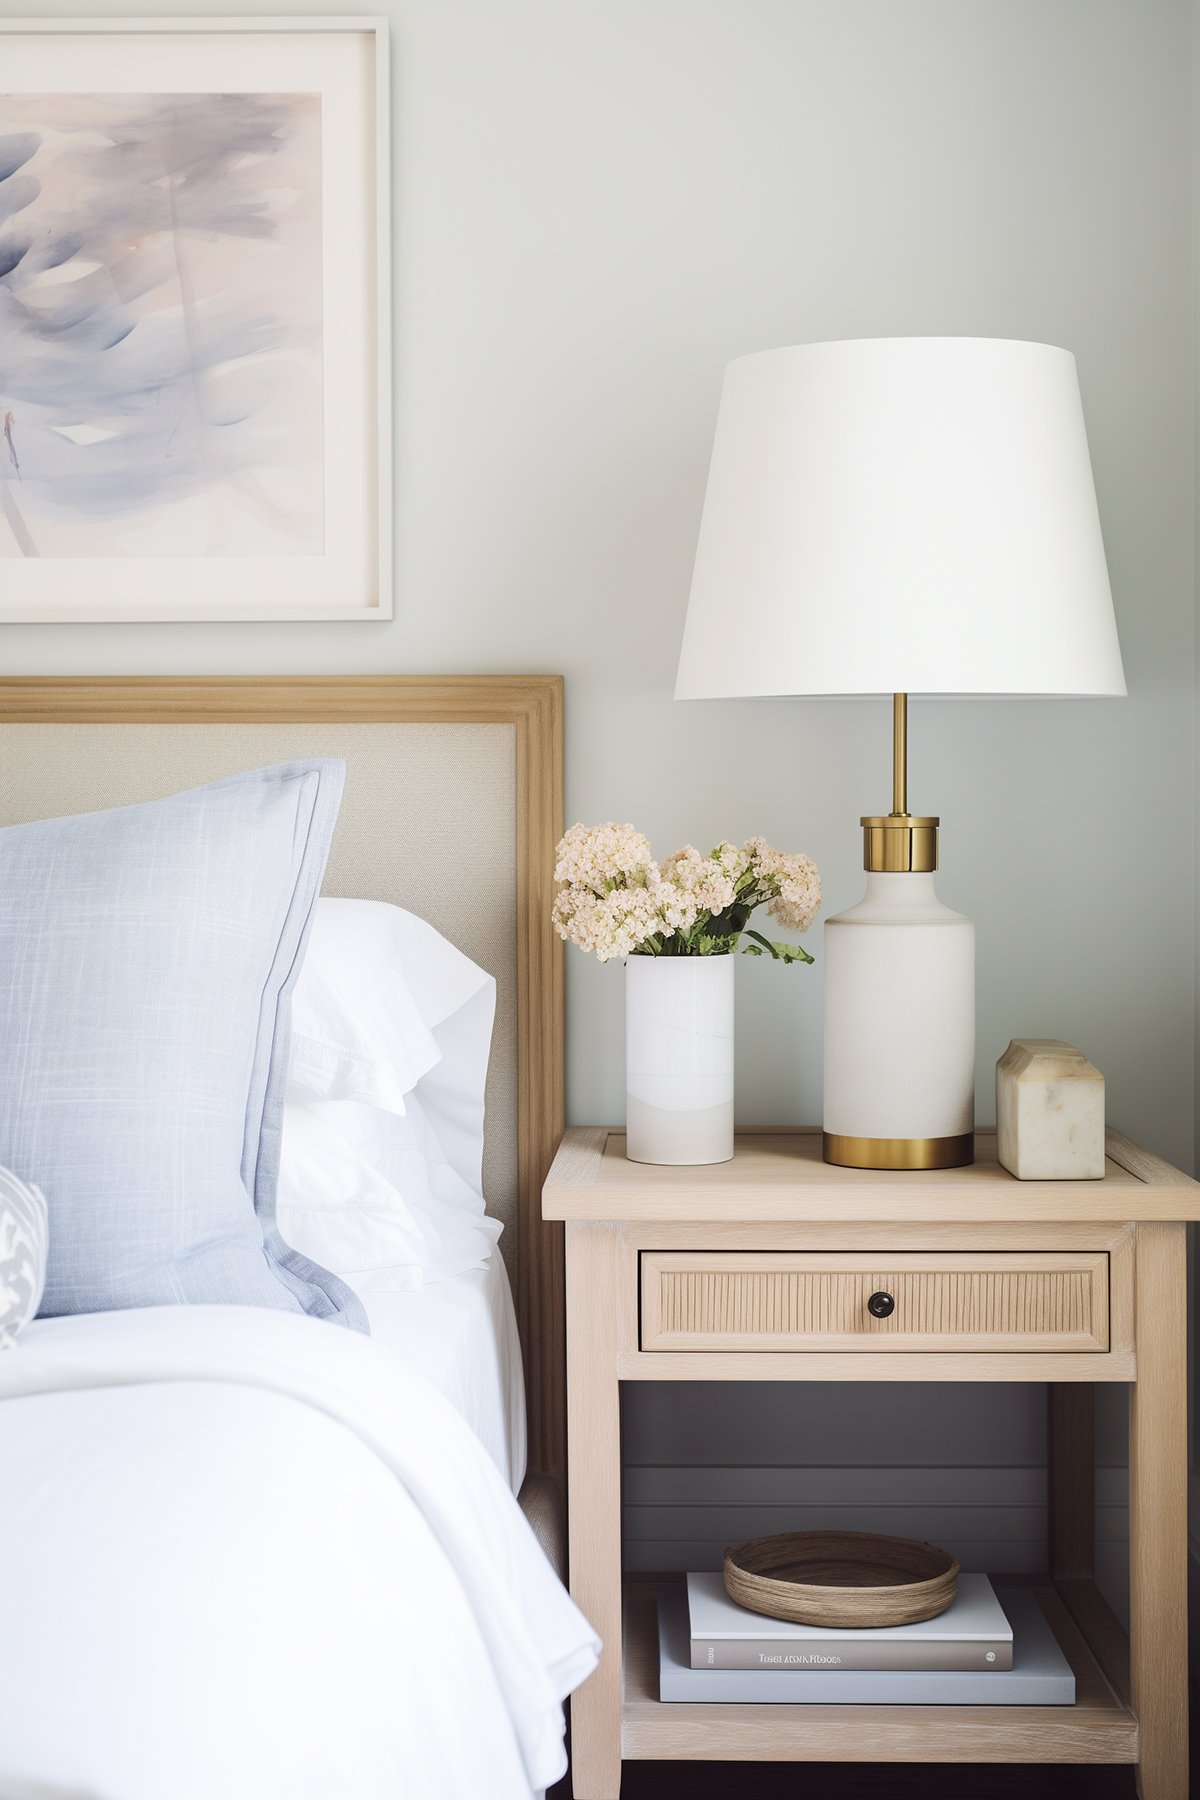 Bedroom nightstand with lamp and vase of flowers. The walls are painted Benjamin Moore Gray Owl.